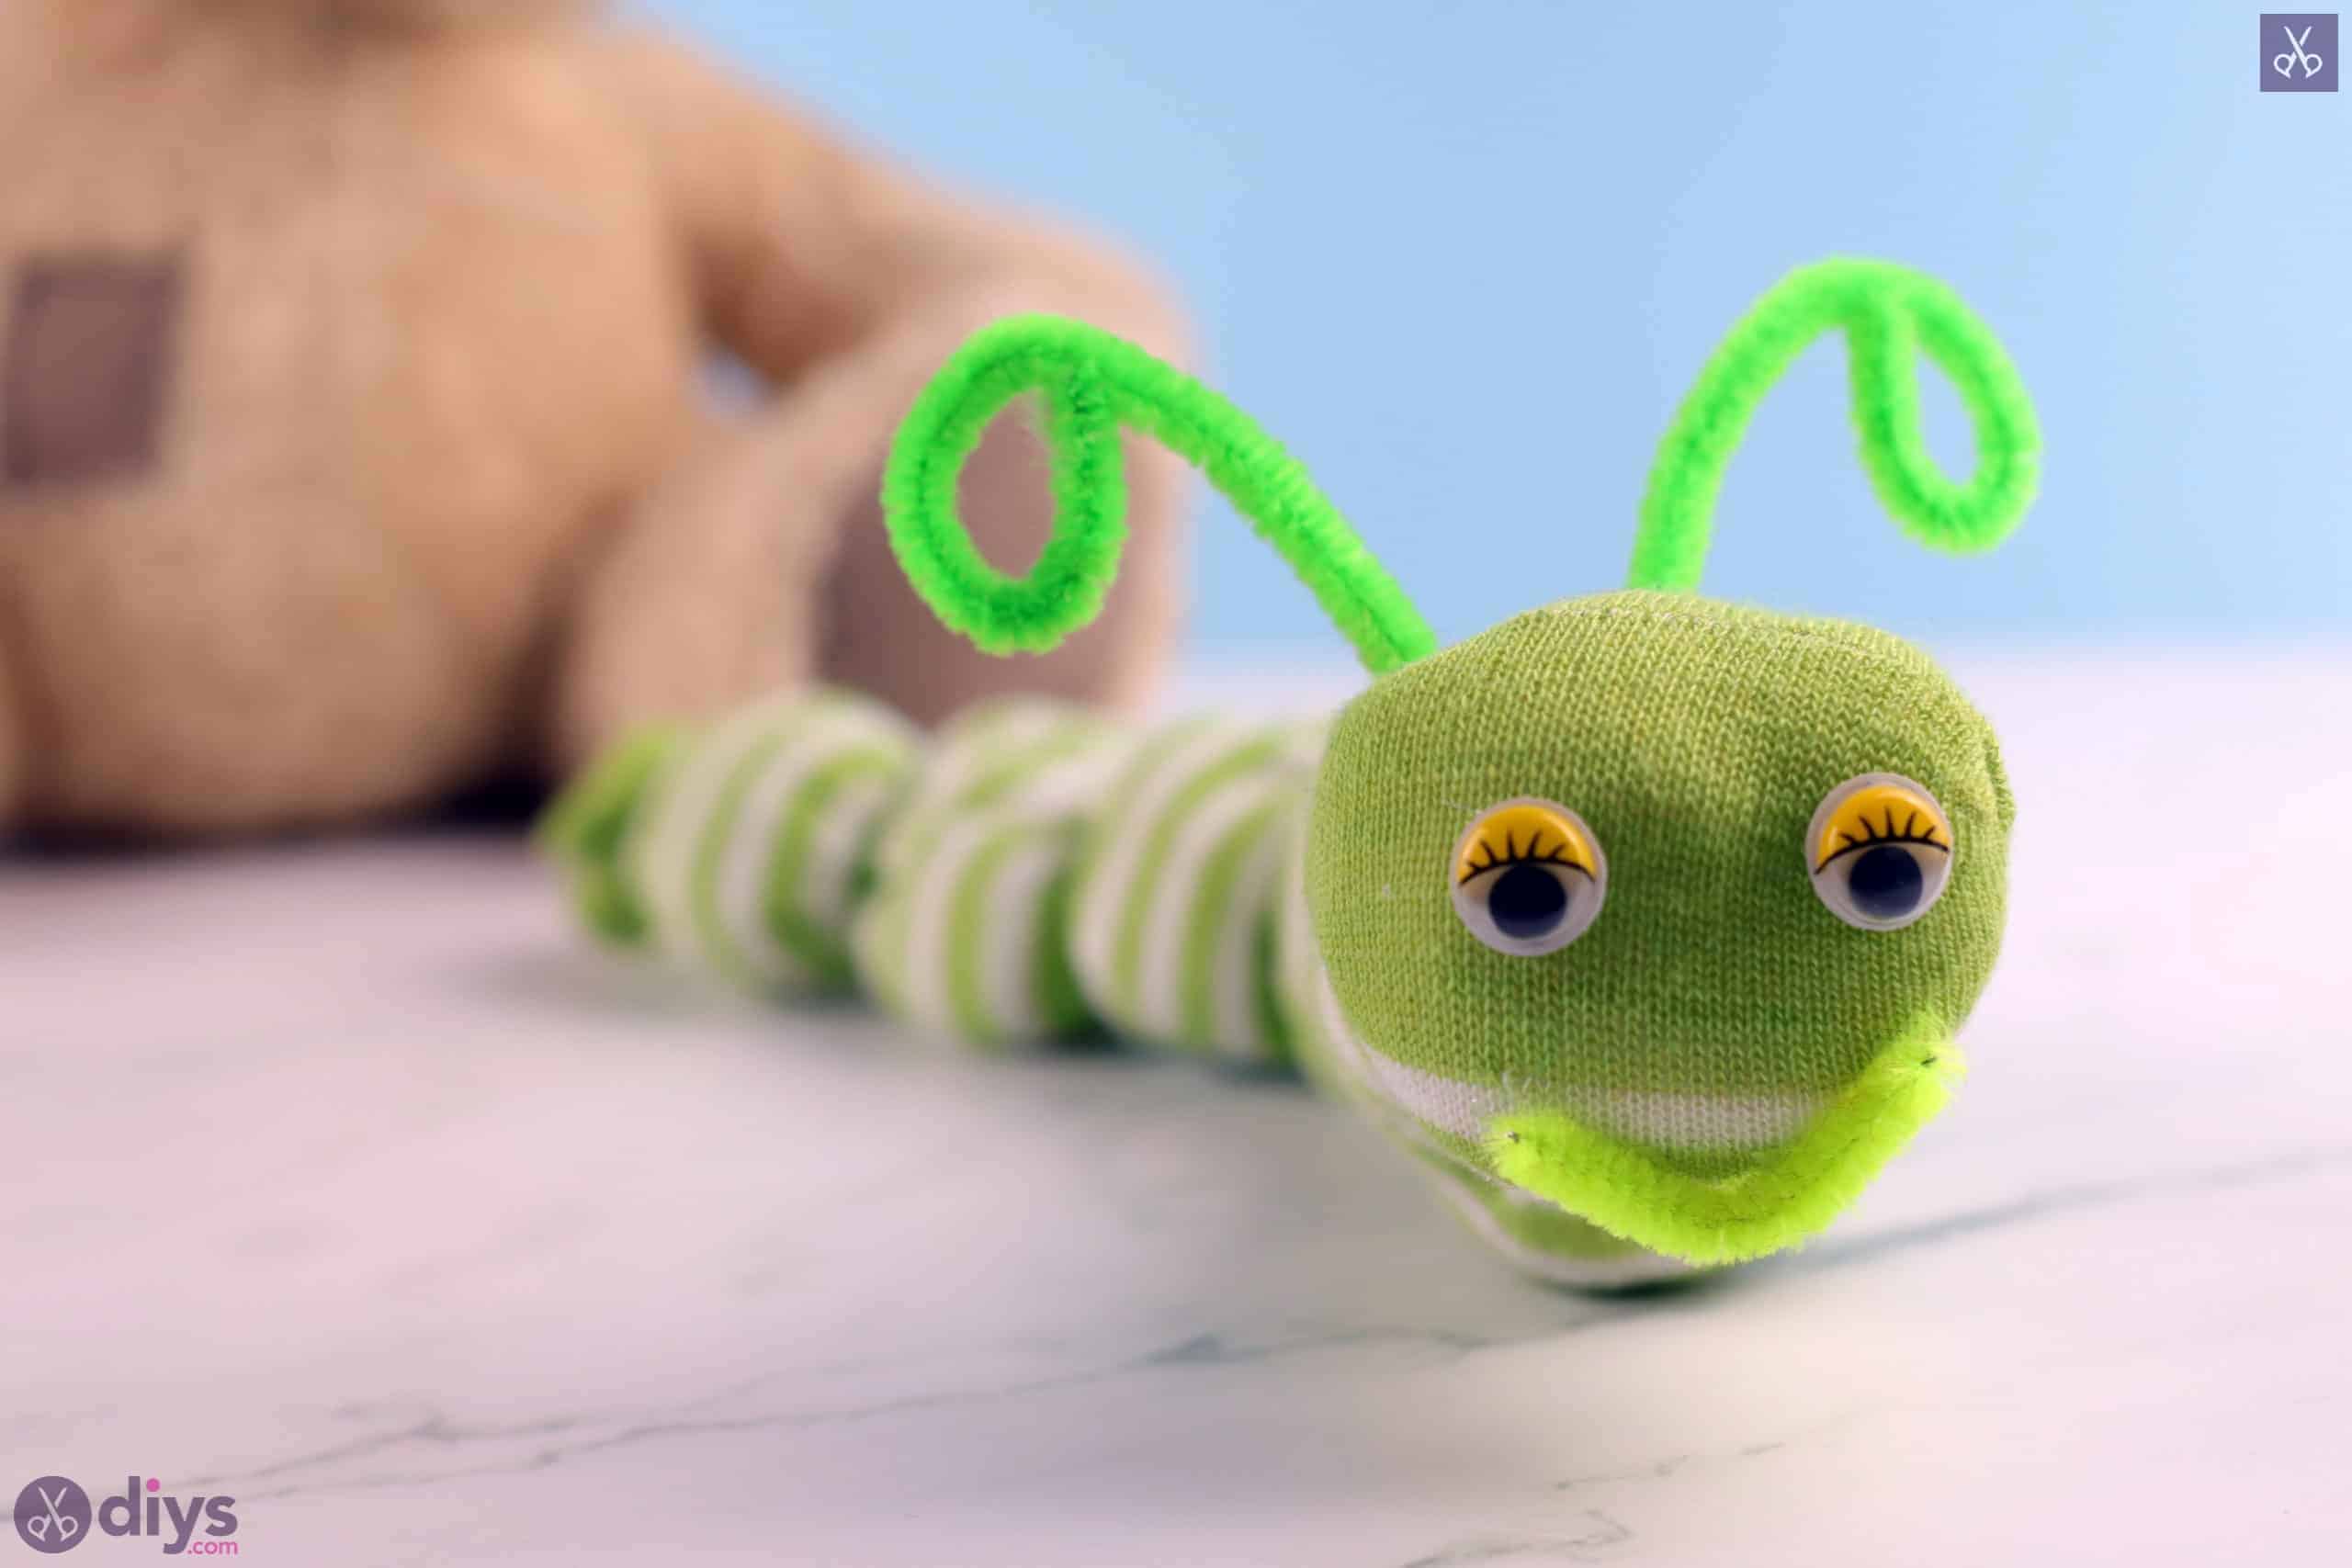 How to Make No-Sew Sock Worms - Video Tutorial